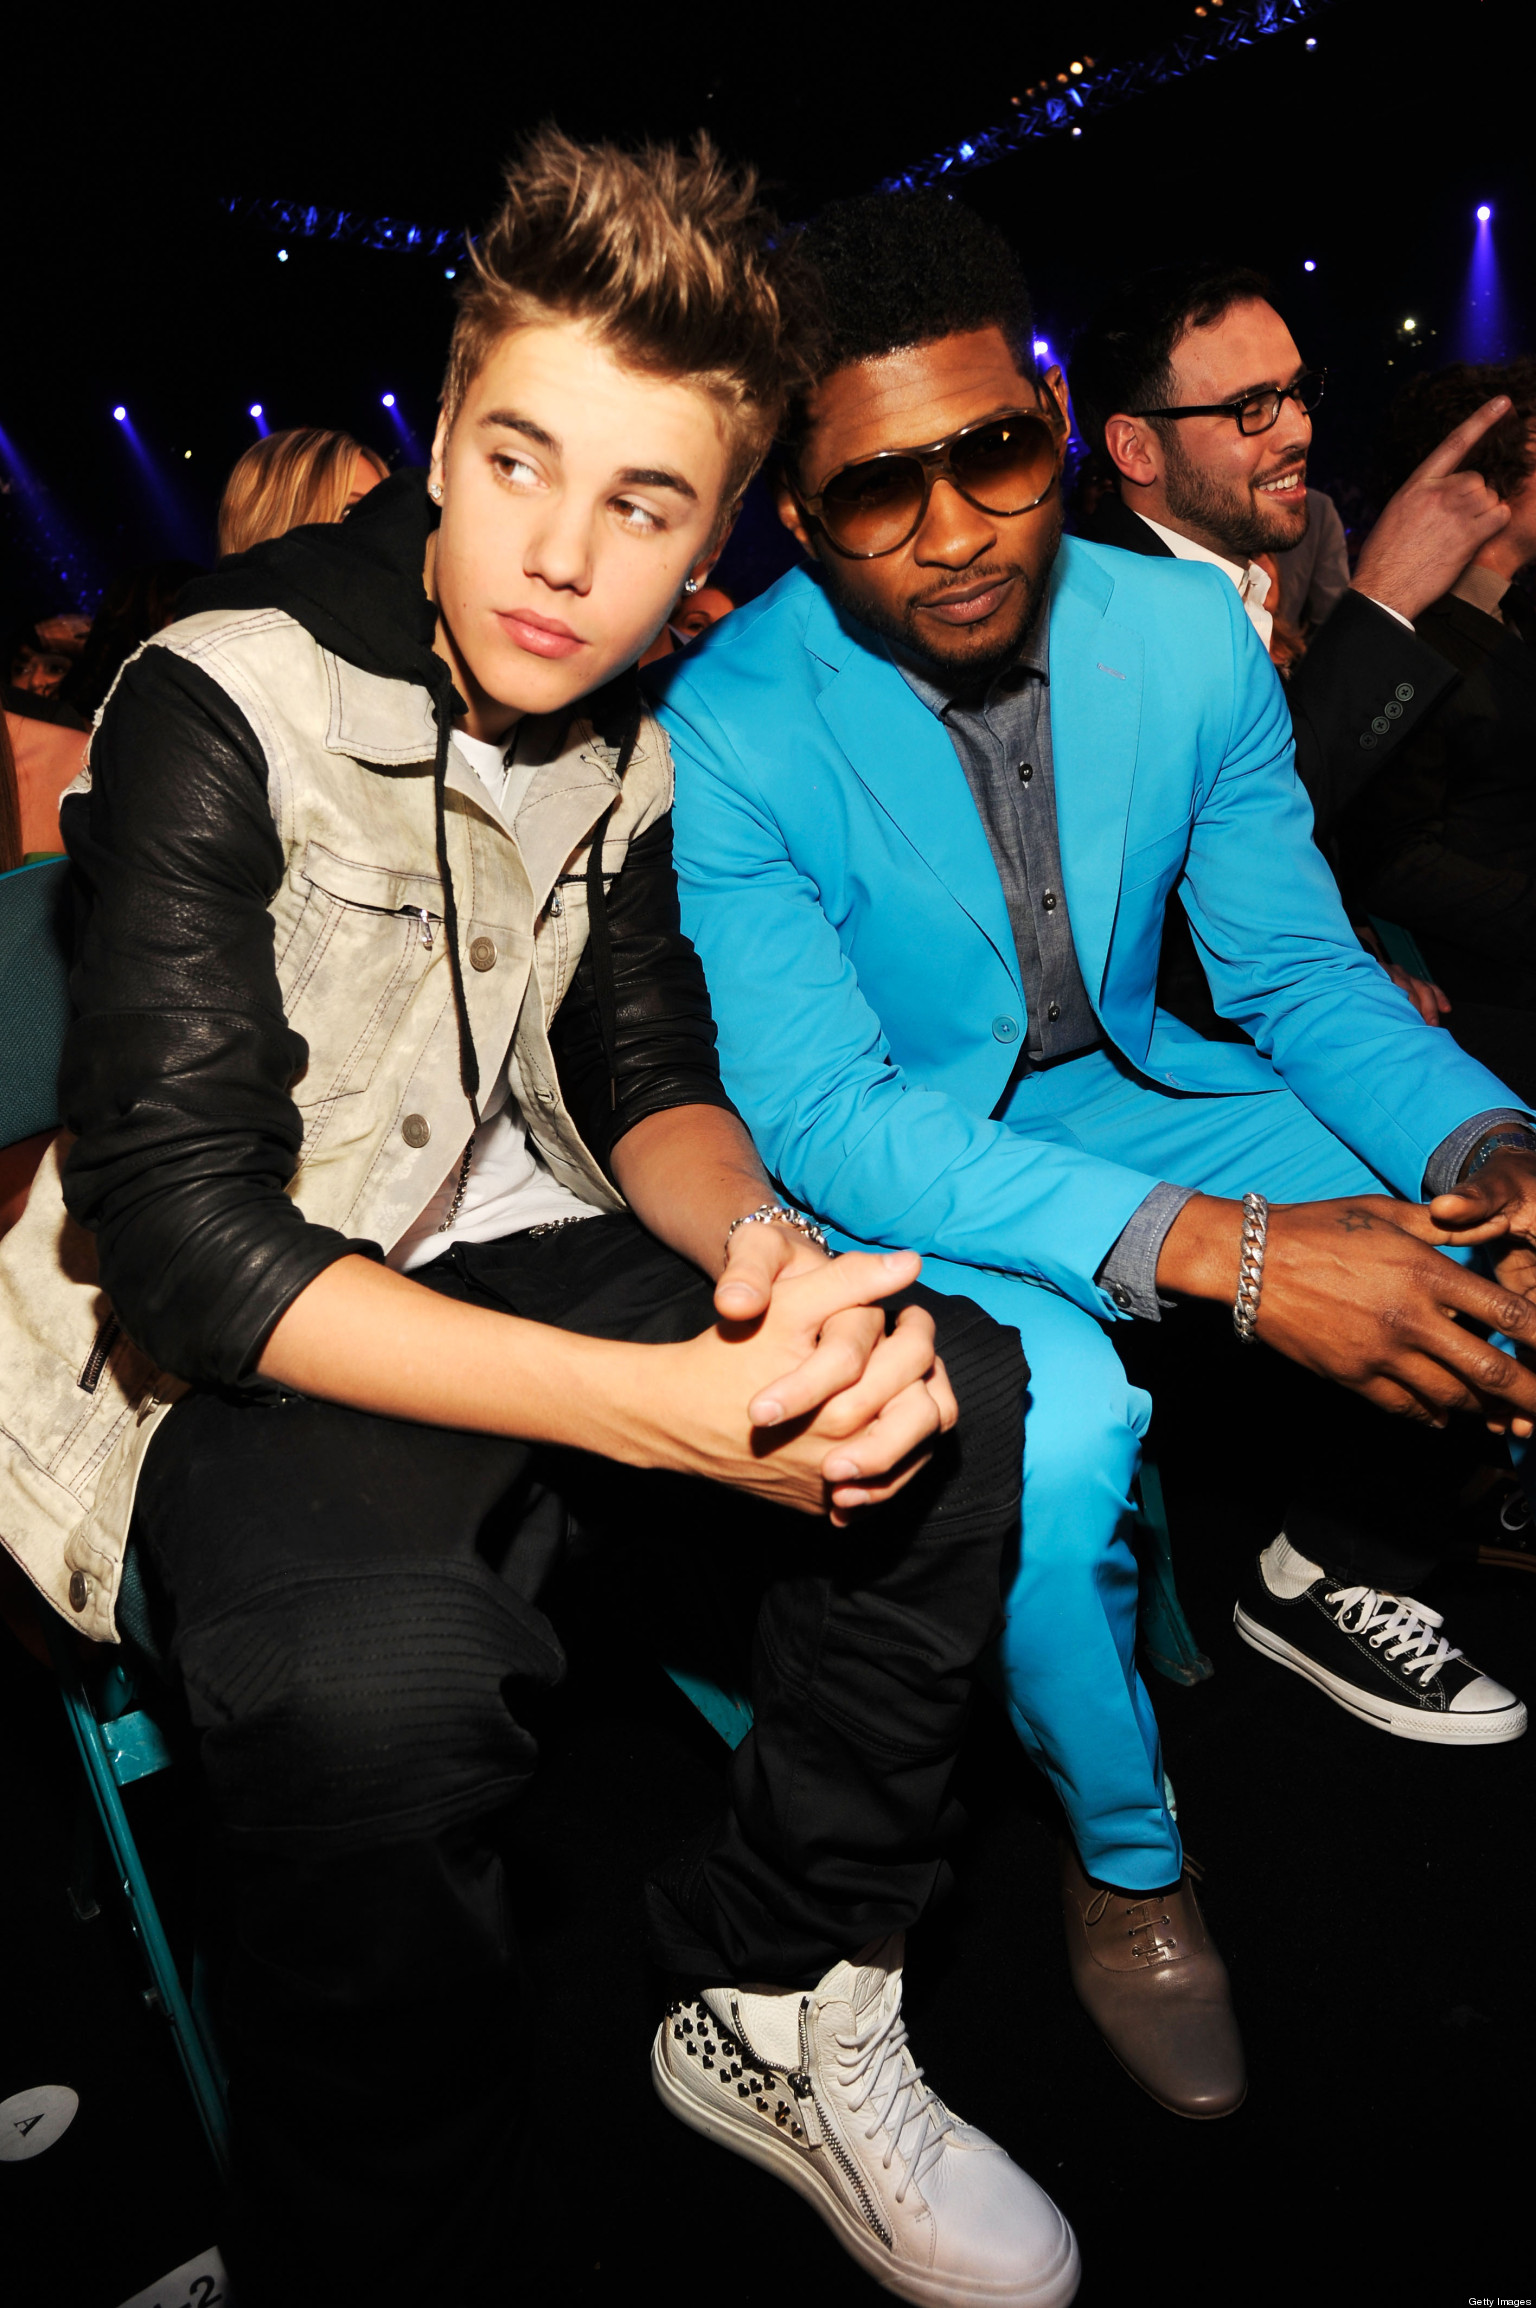 Usher On Justin Bieber: He's Young, 'We Hope... He'll Continue To Mature' | HuffPost1536 x 2308